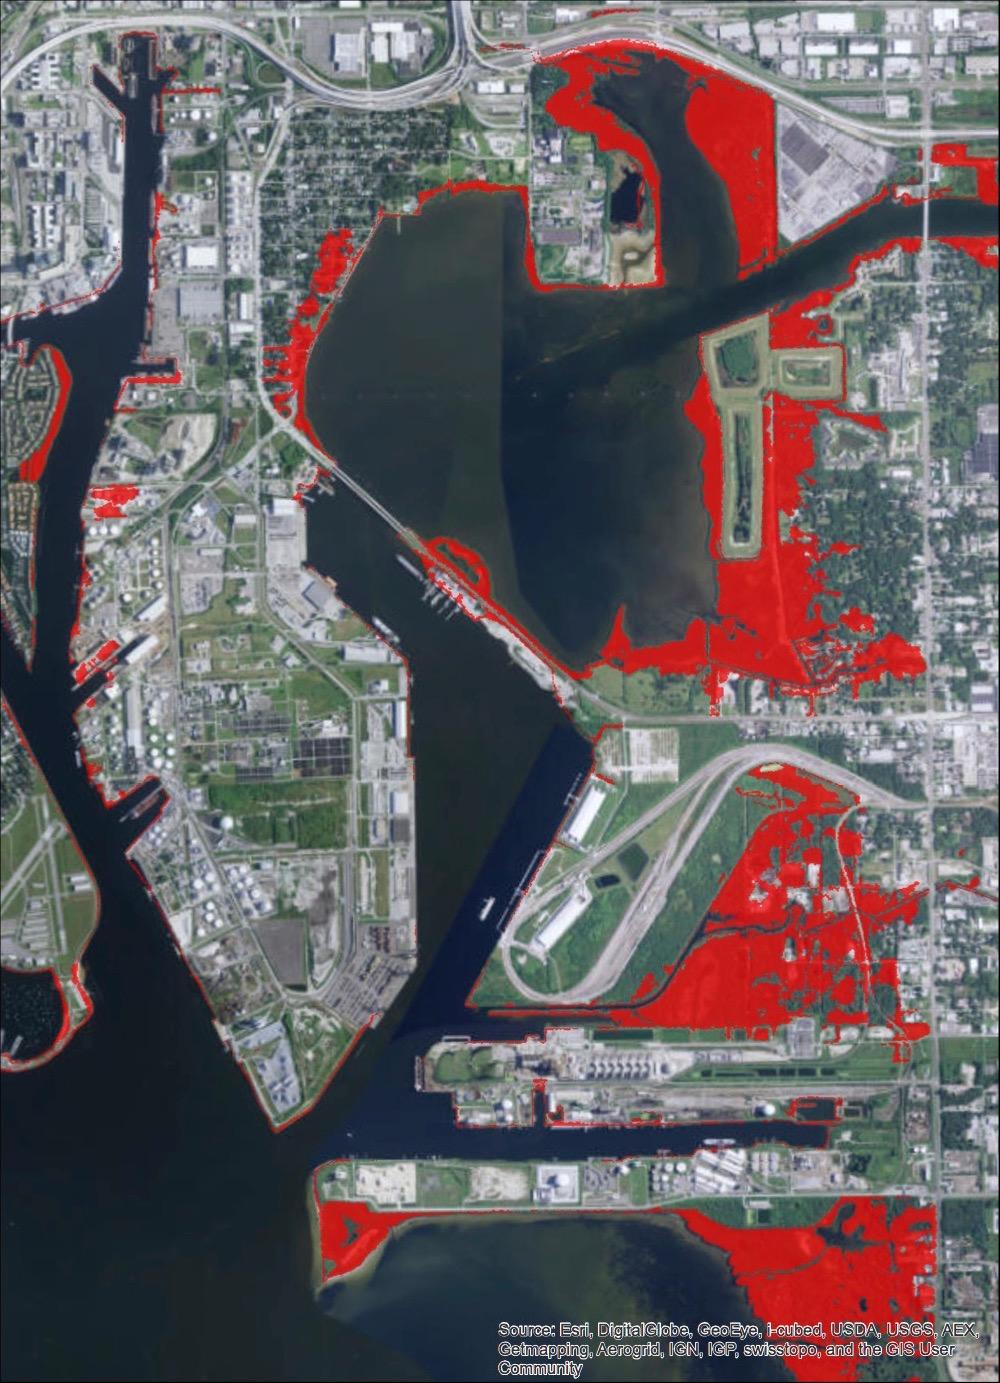 Utilizing Sea Level Rise Projection Tools Impacts to Port Tampa Bay Tampa Map: 2080 Sea